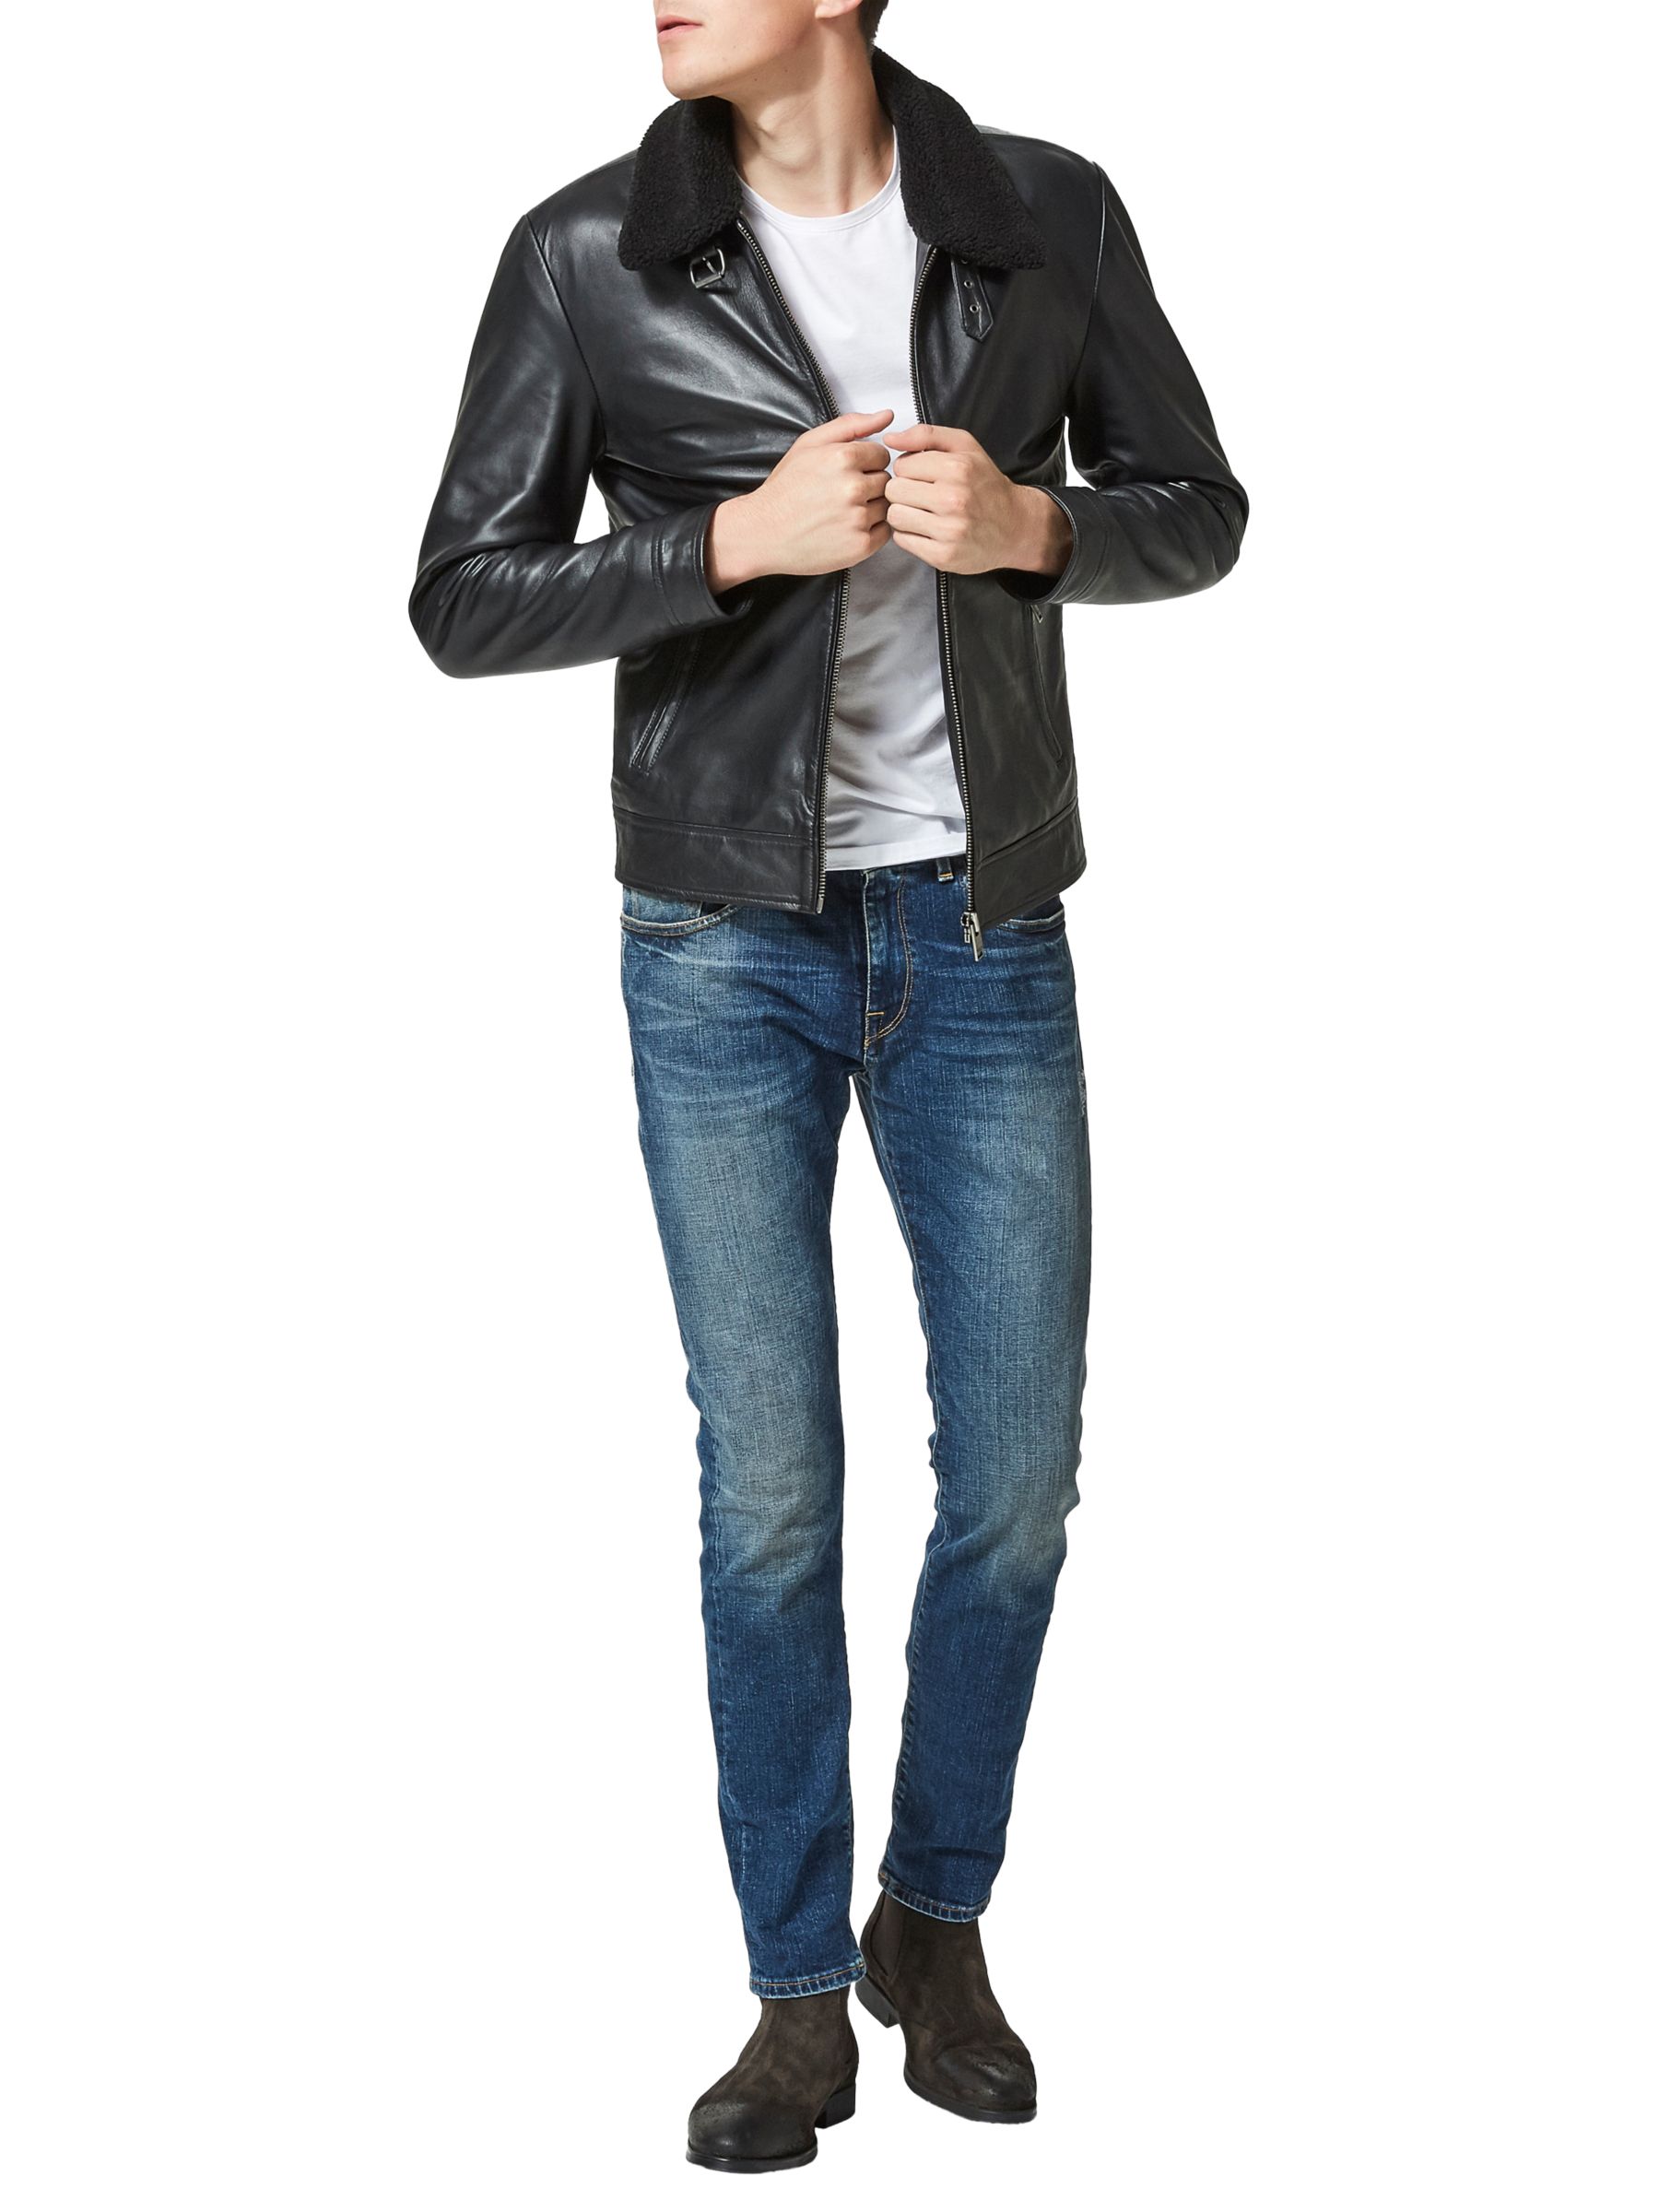 Selected Homme Teddy Leather Jacket, Black